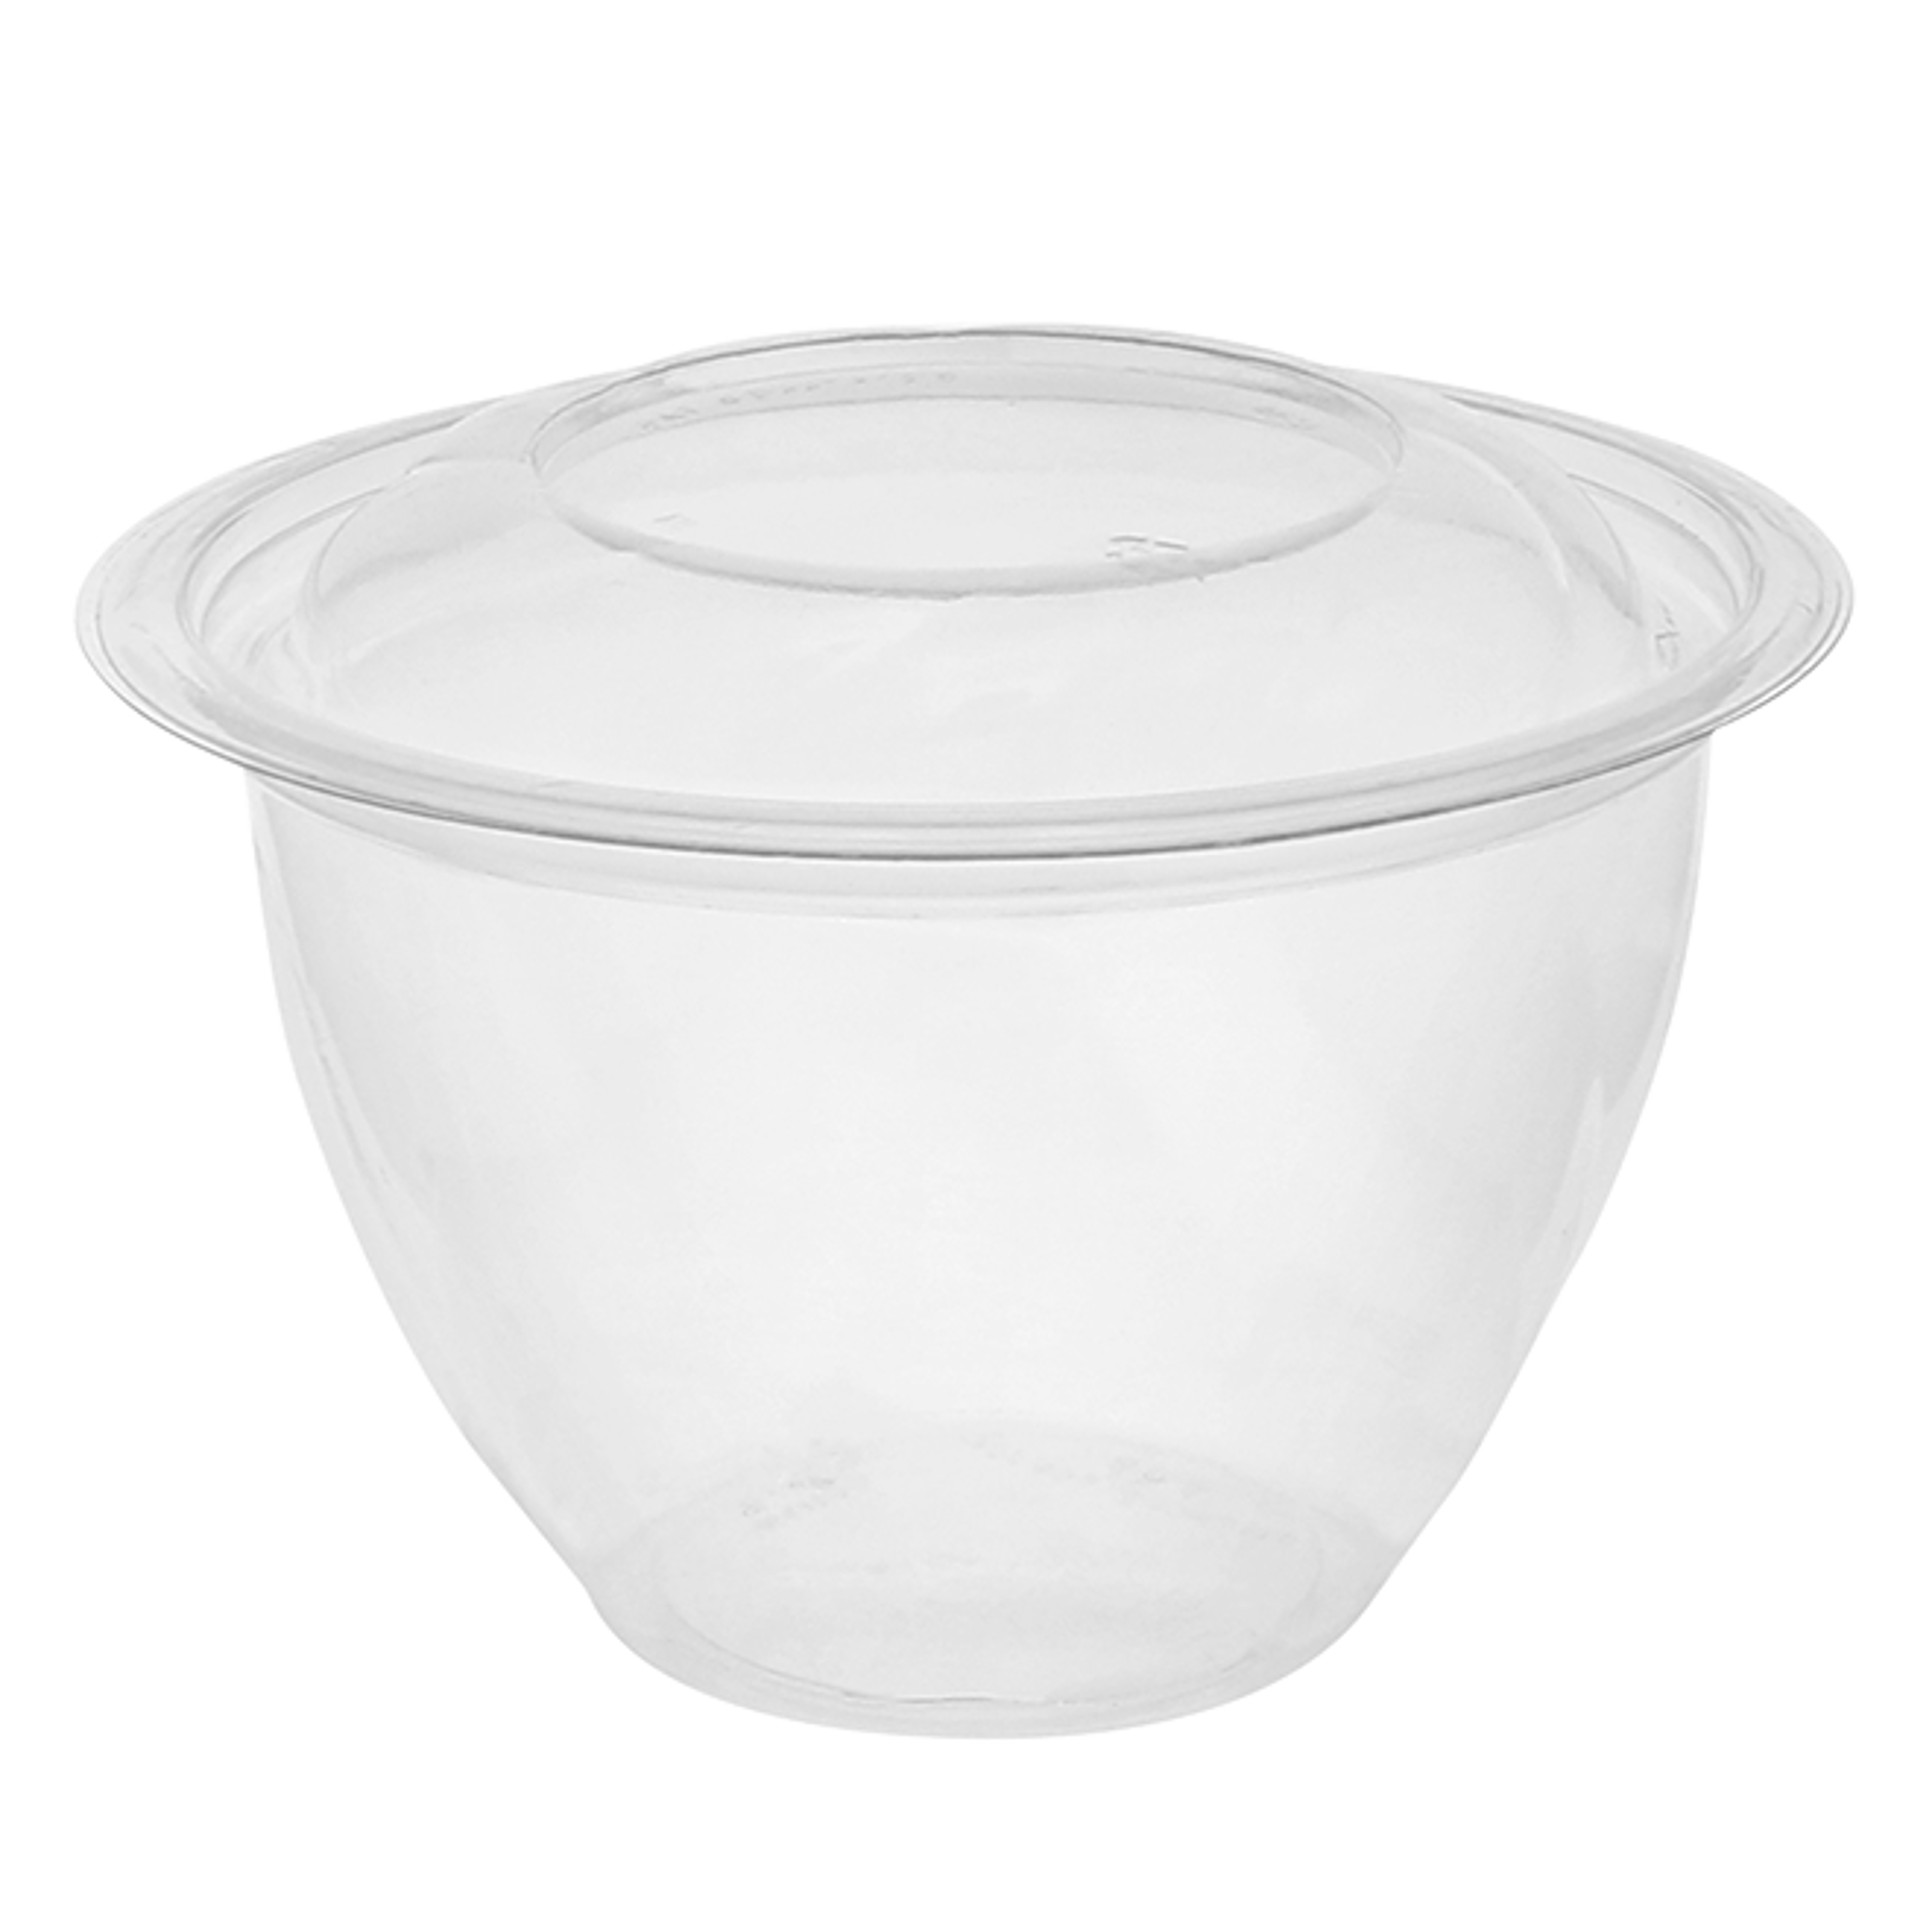 White Disposable Plastic Square Bowls, Packaging Type: Box, Size: 120 ml